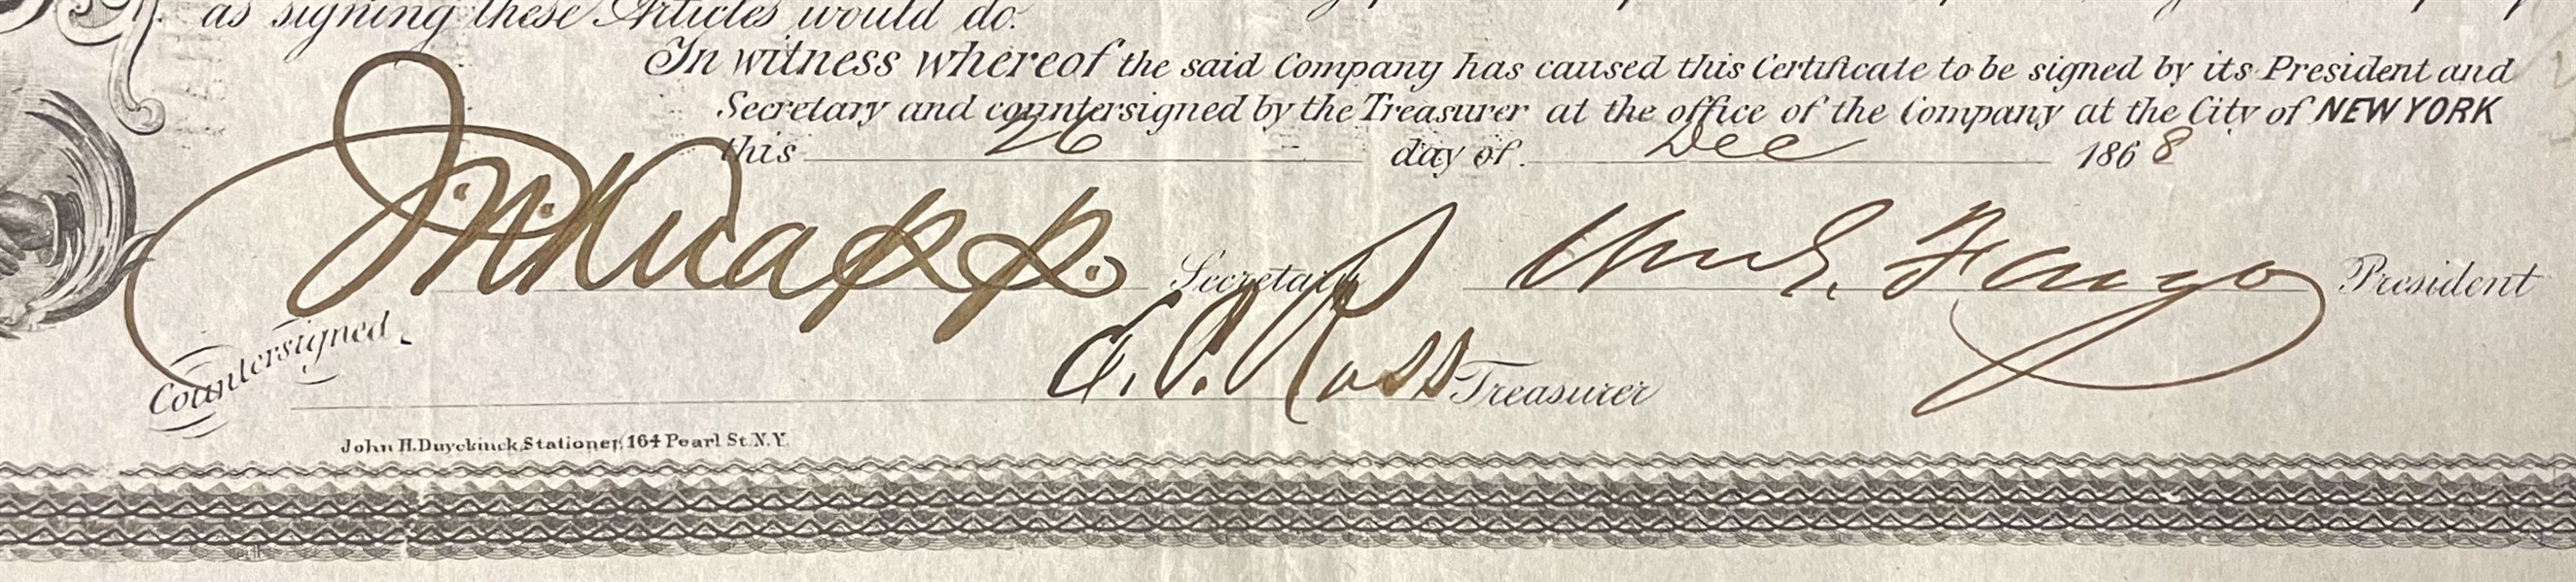 AMERICAN MERCHANTS UNION EXPRESS COMPANY Signed by Fargo